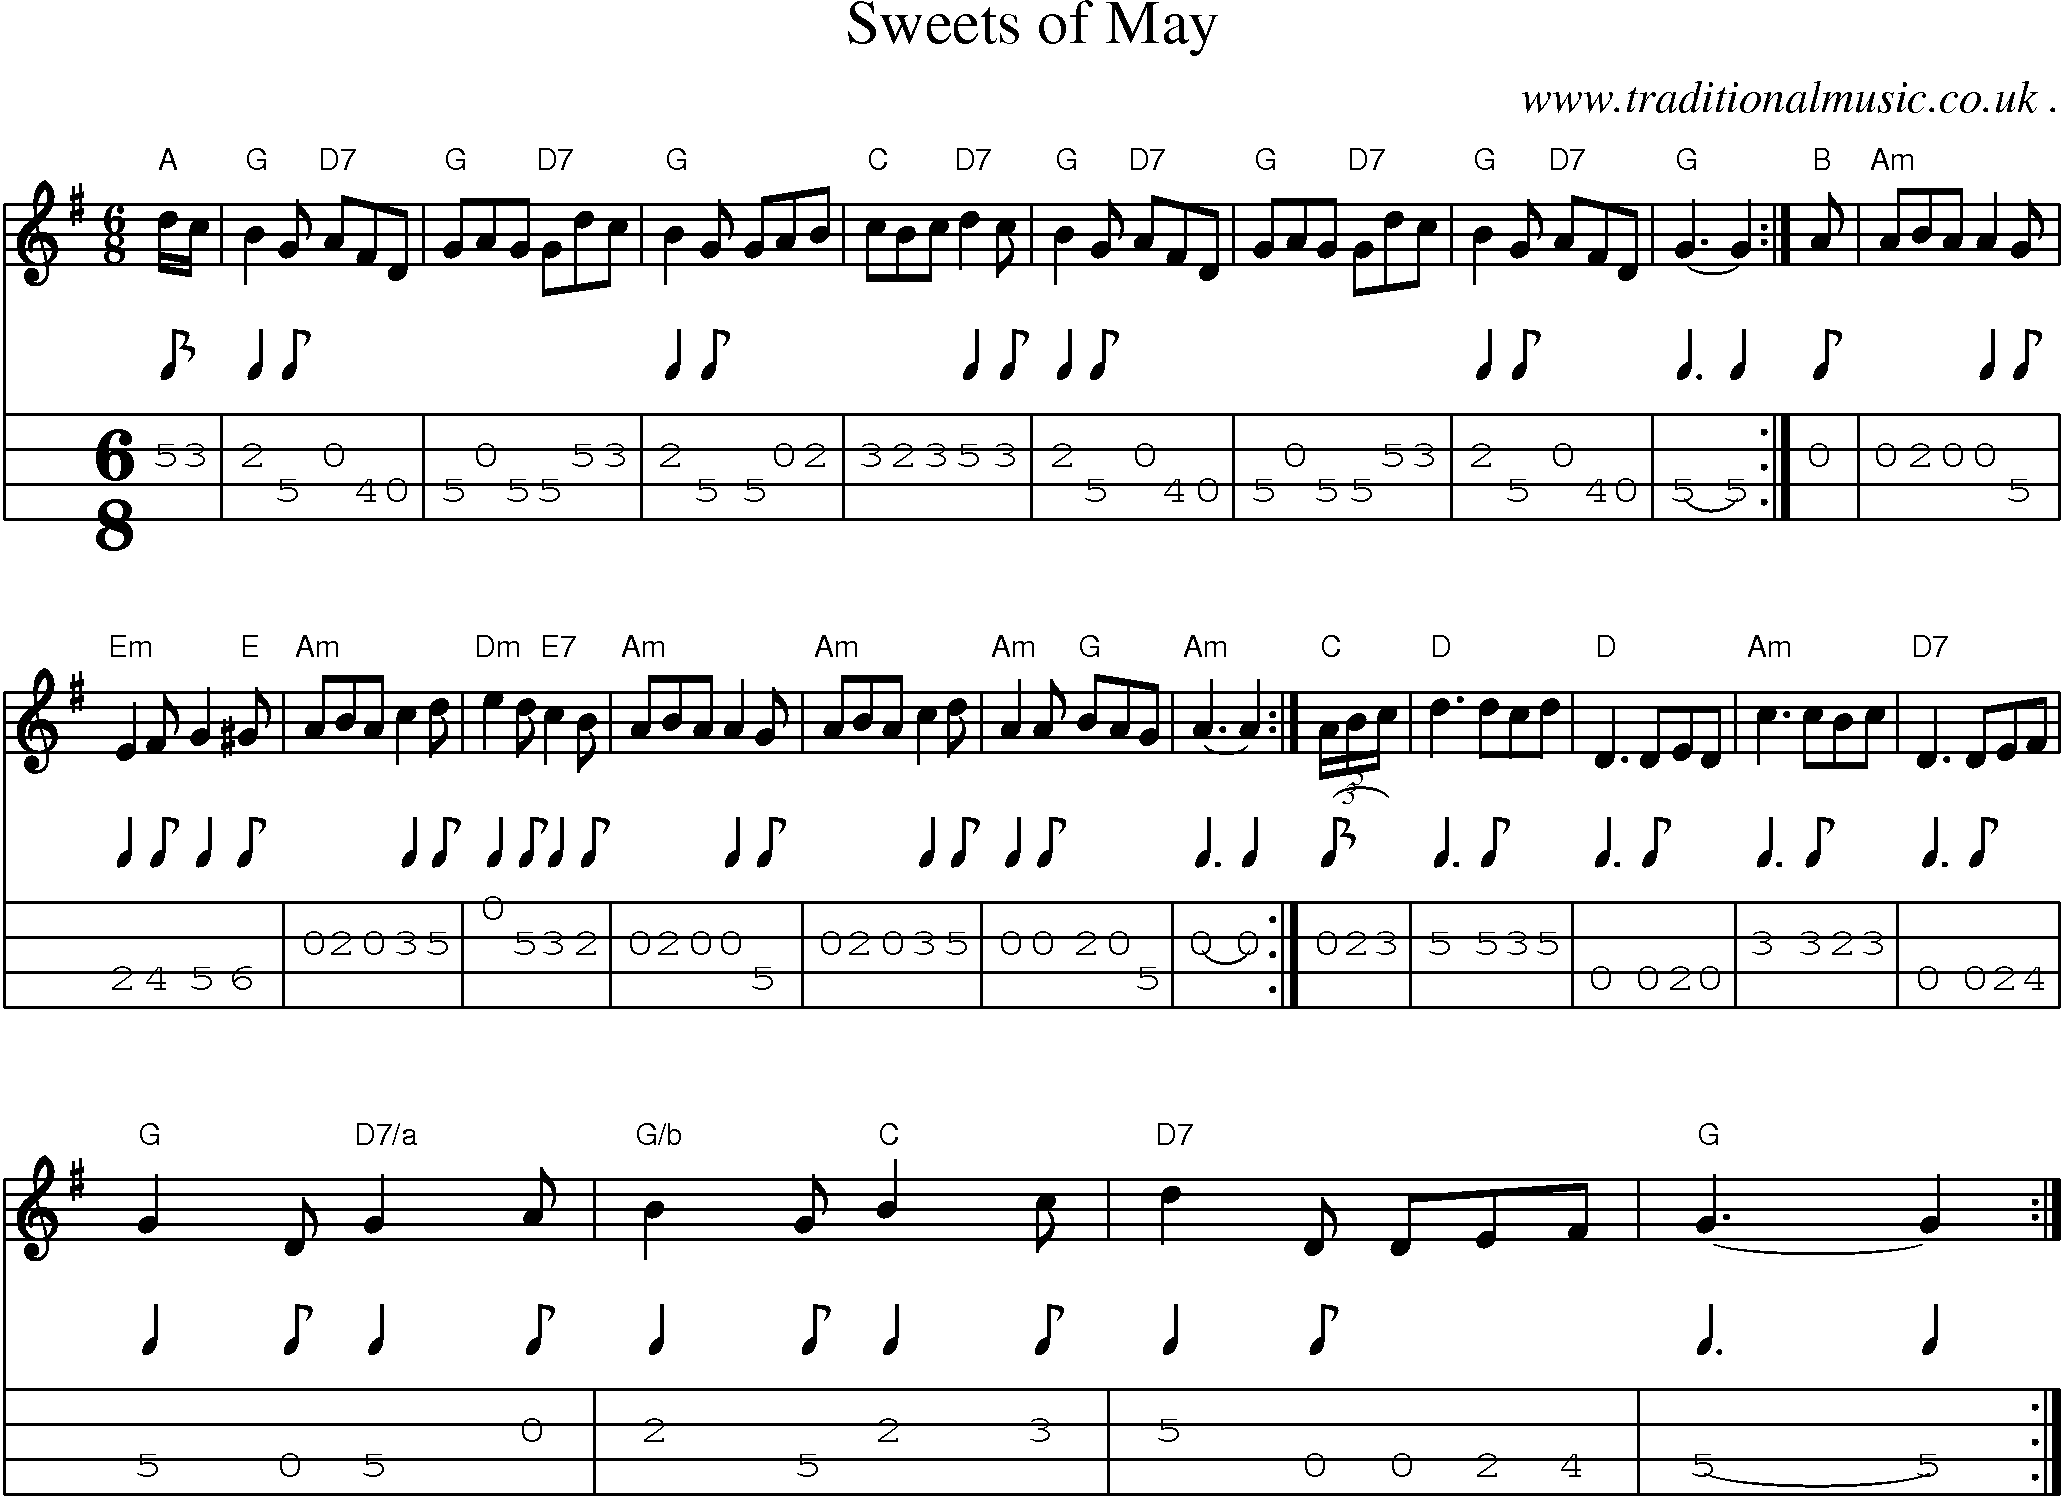 Sheet-music  score, Chords and Mandolin Tabs for Sweets Of May